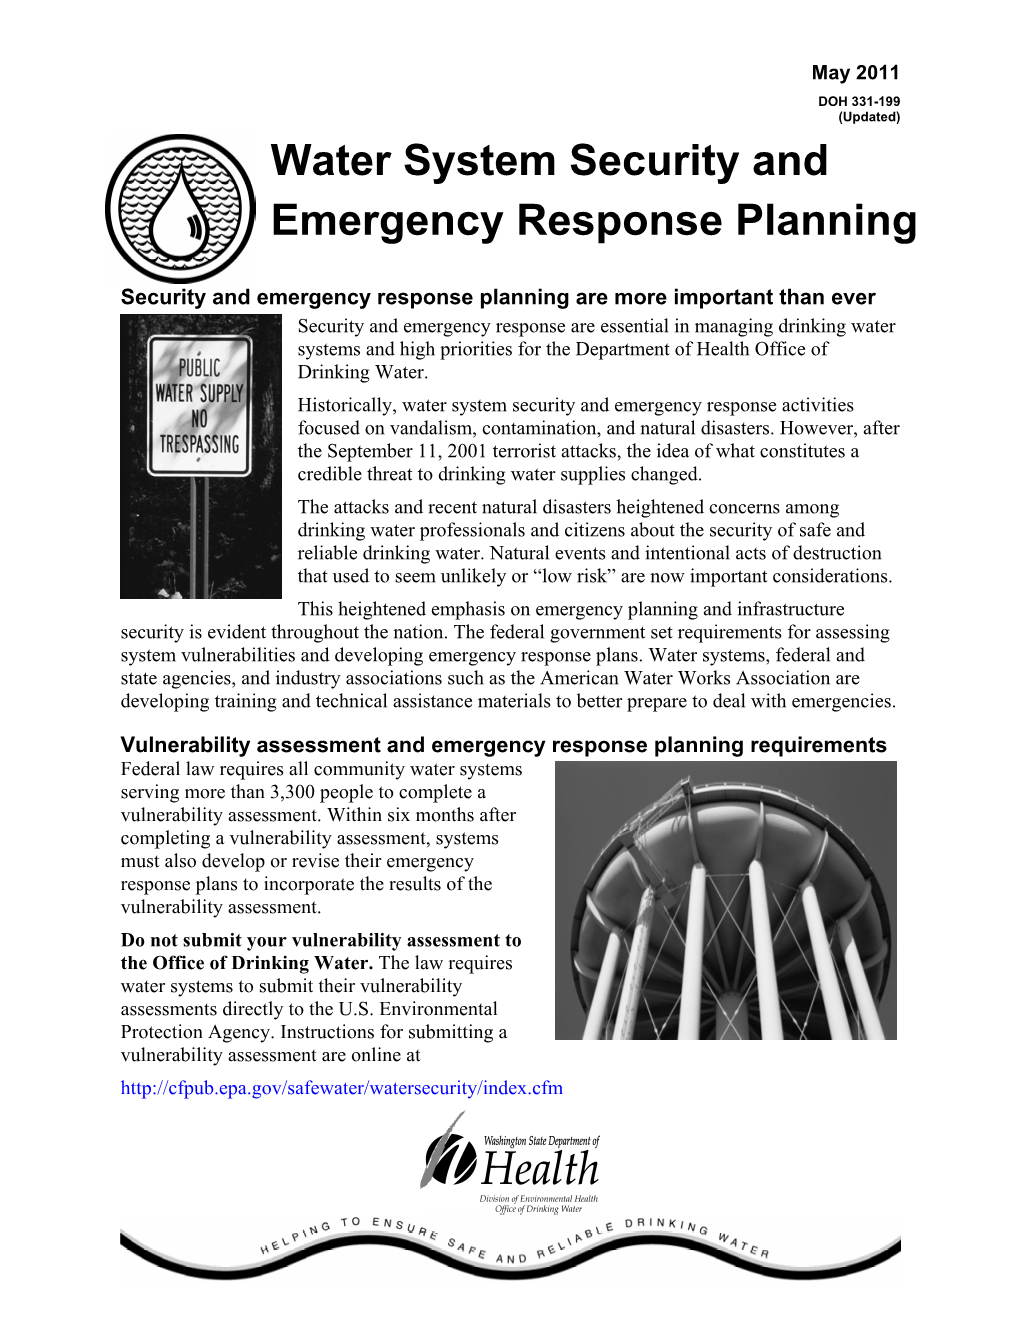 Water System Security and Emergency Response Planning